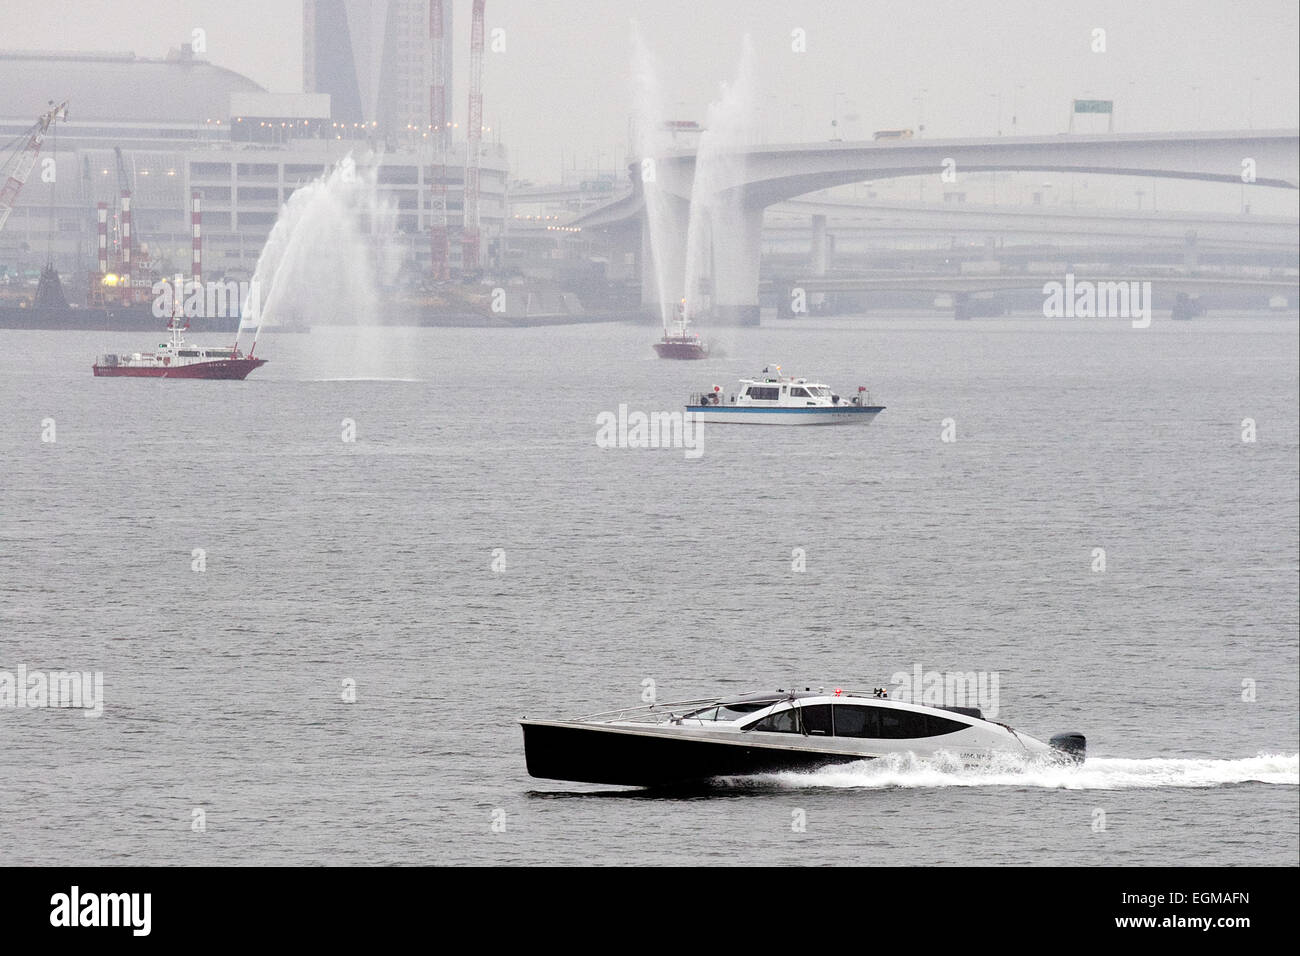 The Duke of Cambridge arrives in Tokyo by boat on February 26th, 2015. The Prince flew in to Tokyo International Airport on Thursday afternoon and then traveled to Tokyo city on a cruise boat to visit the historic Hama Rikyu gardens and a traditional Japanese tea house. He arrived on a rainy day but nevertheless Japanese TV crews were out to try to catch a glimpse of the Prince as his boat entered Tokyo Harbour and passed under the Rainbow Bridge. On his visit he will launch an Innovation is Great campaign and also travel to Ishinomaki in Miyagi Prefecture to meet people who were affected by t Stock Photo